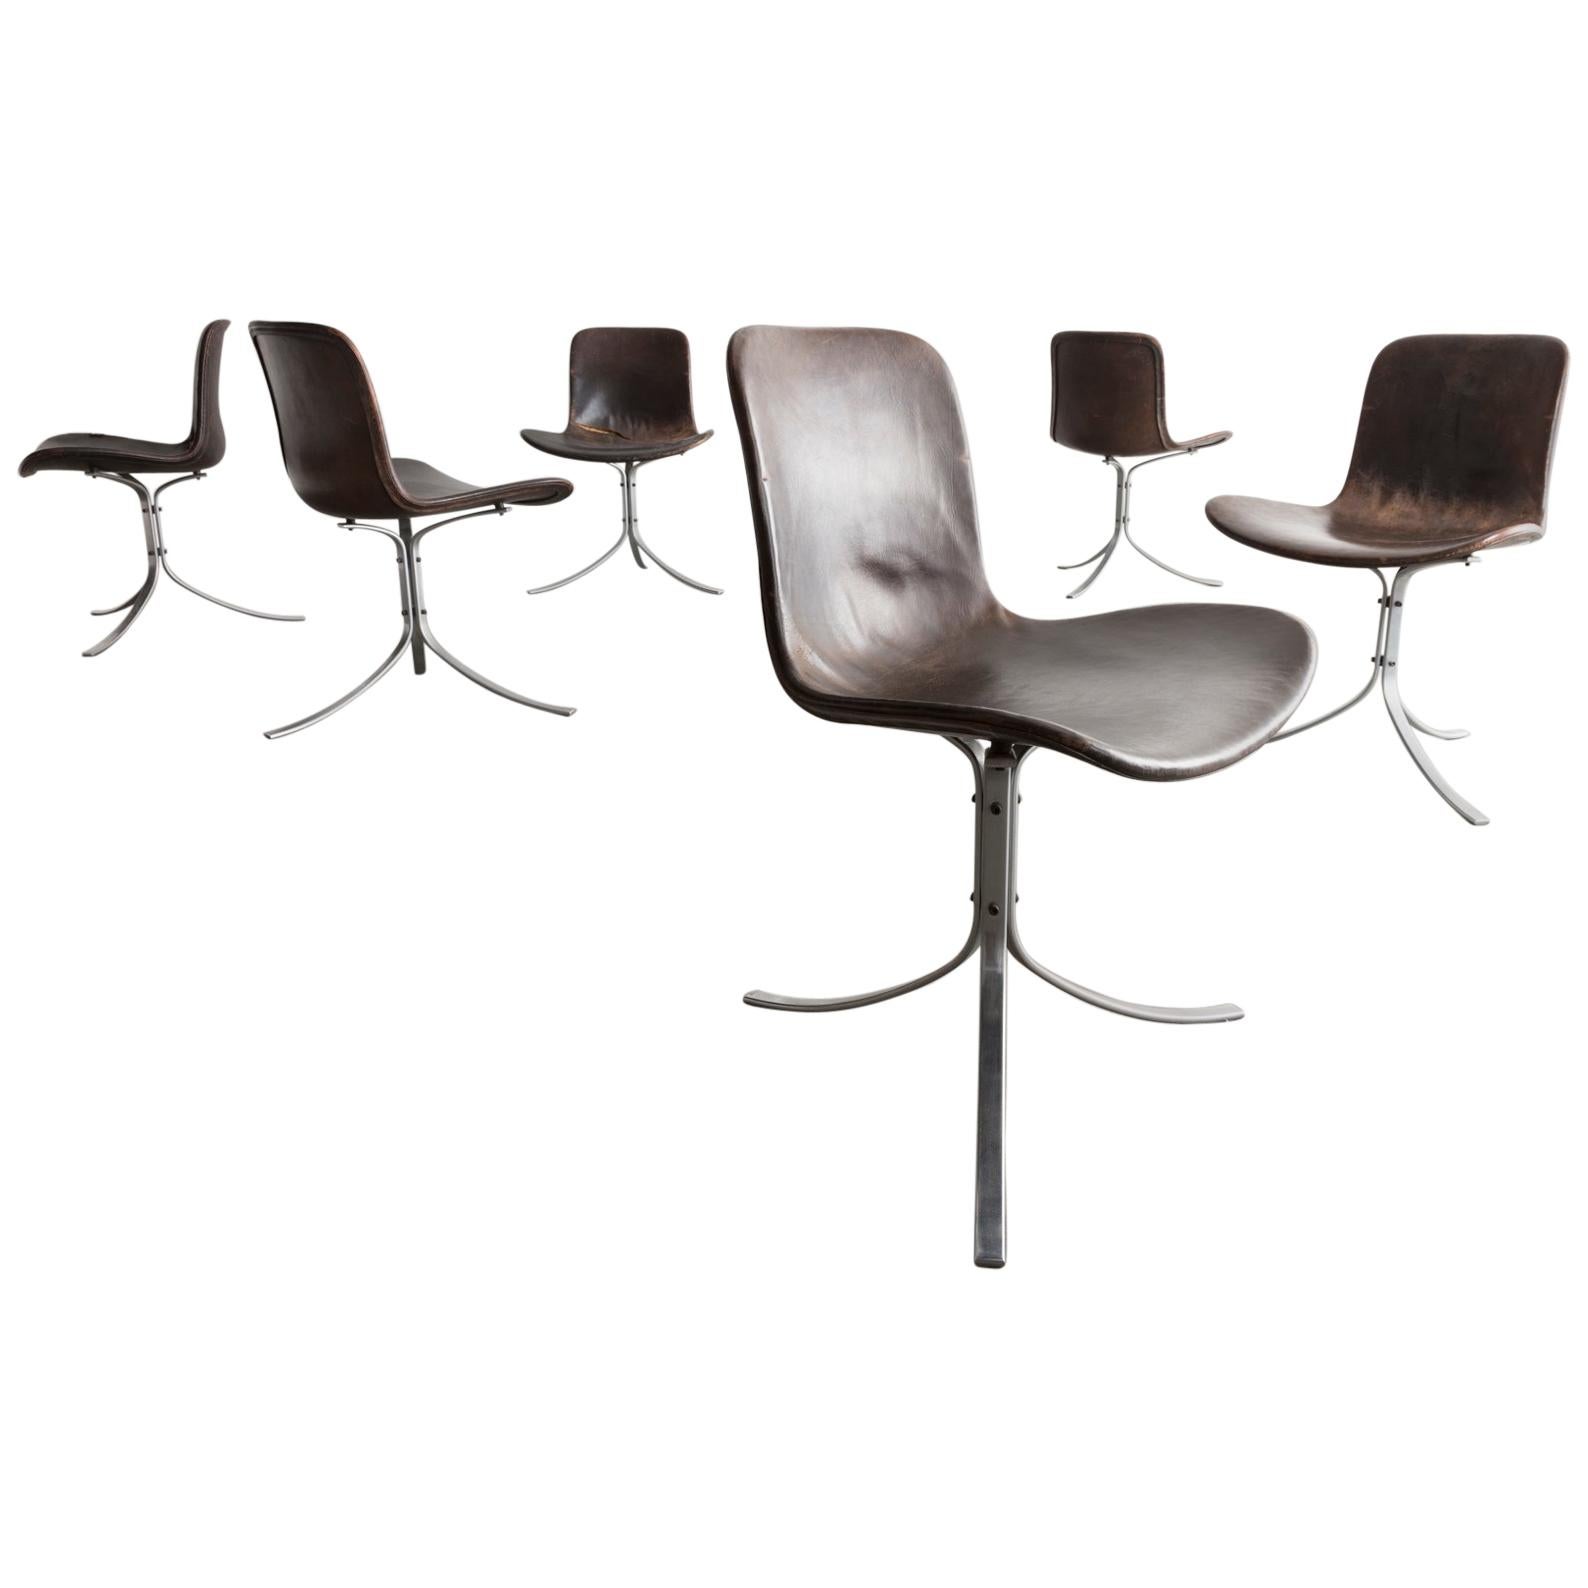 Set of Six "Pk-9" Chairs in Black Oxide and Stainless Steel